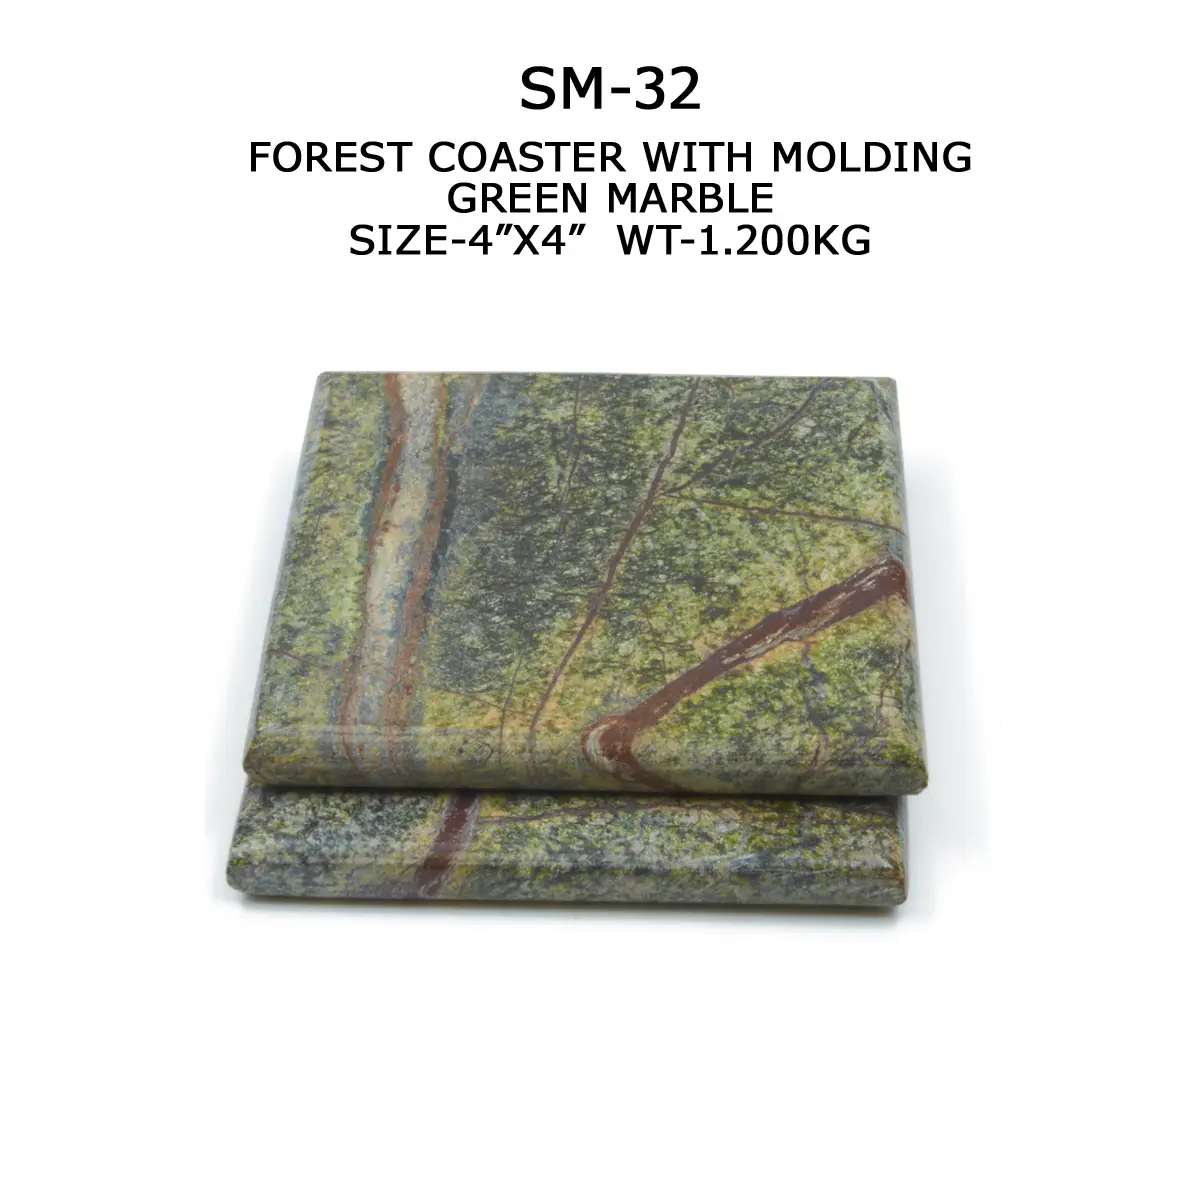 FOREST COASTER WITH MOLDING GREEN MARBLE